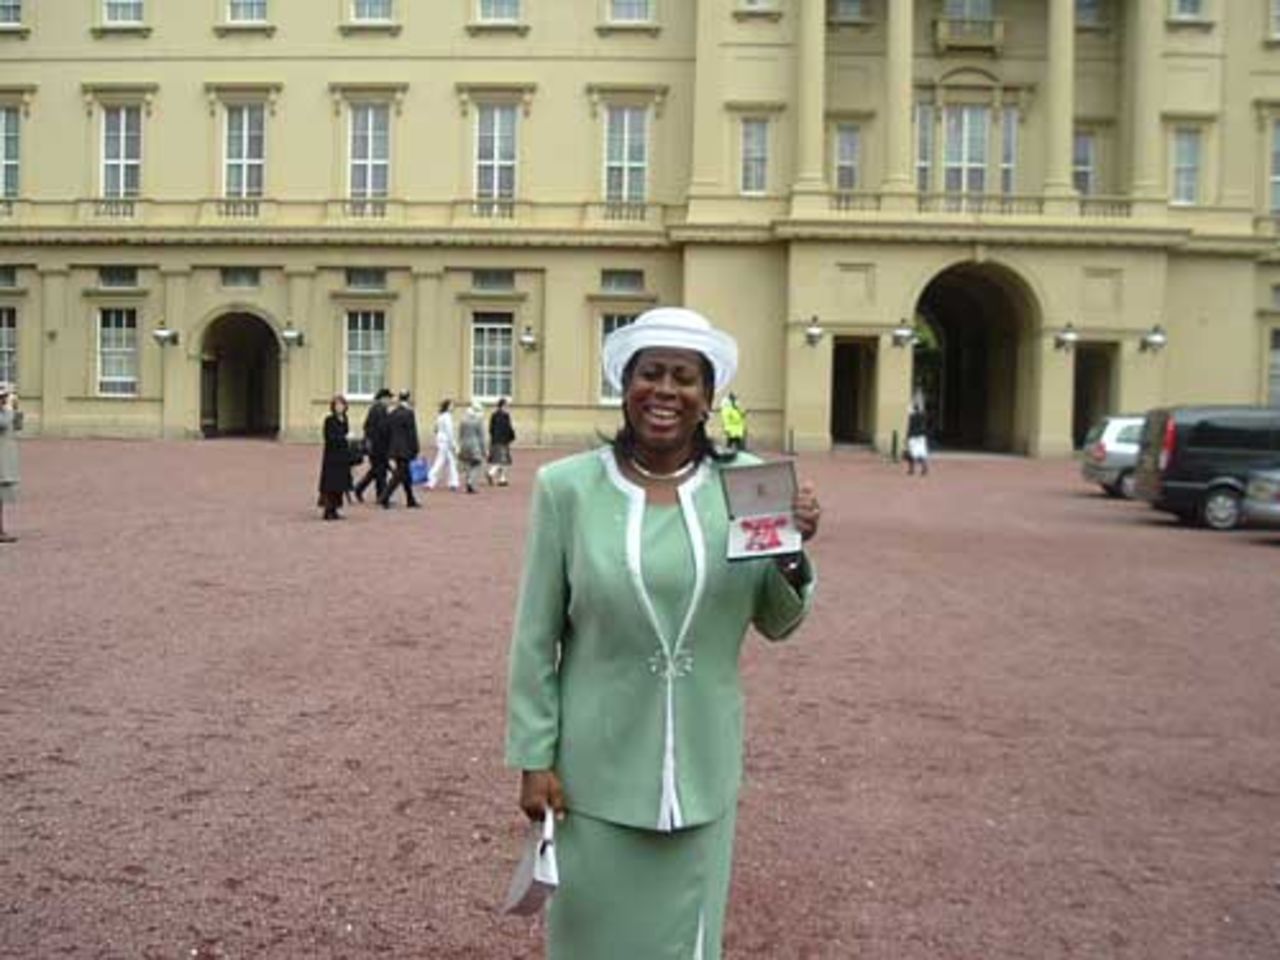 Nadine George stands outside Buckingham palace to receive her MBE